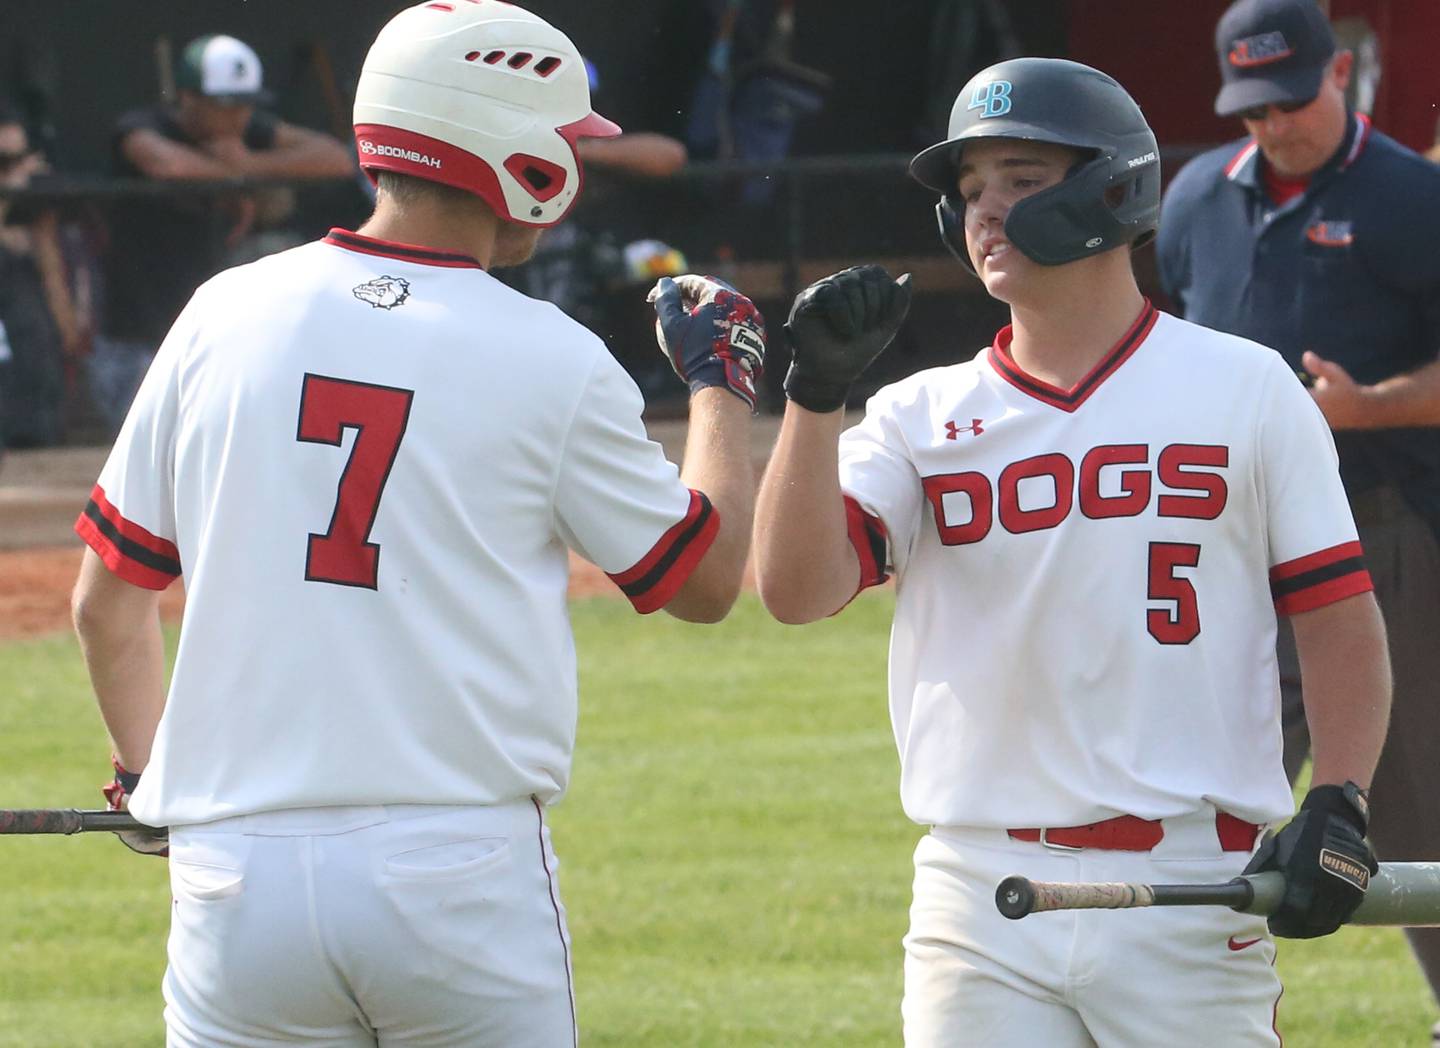 Streator's Landon Muntz (7) fist-bumps teammate Adam Williamson (5) after Williamson scored the first run against Peoria Richwoods in the first inning Wednesday, May 31, 2023, in Metamora.